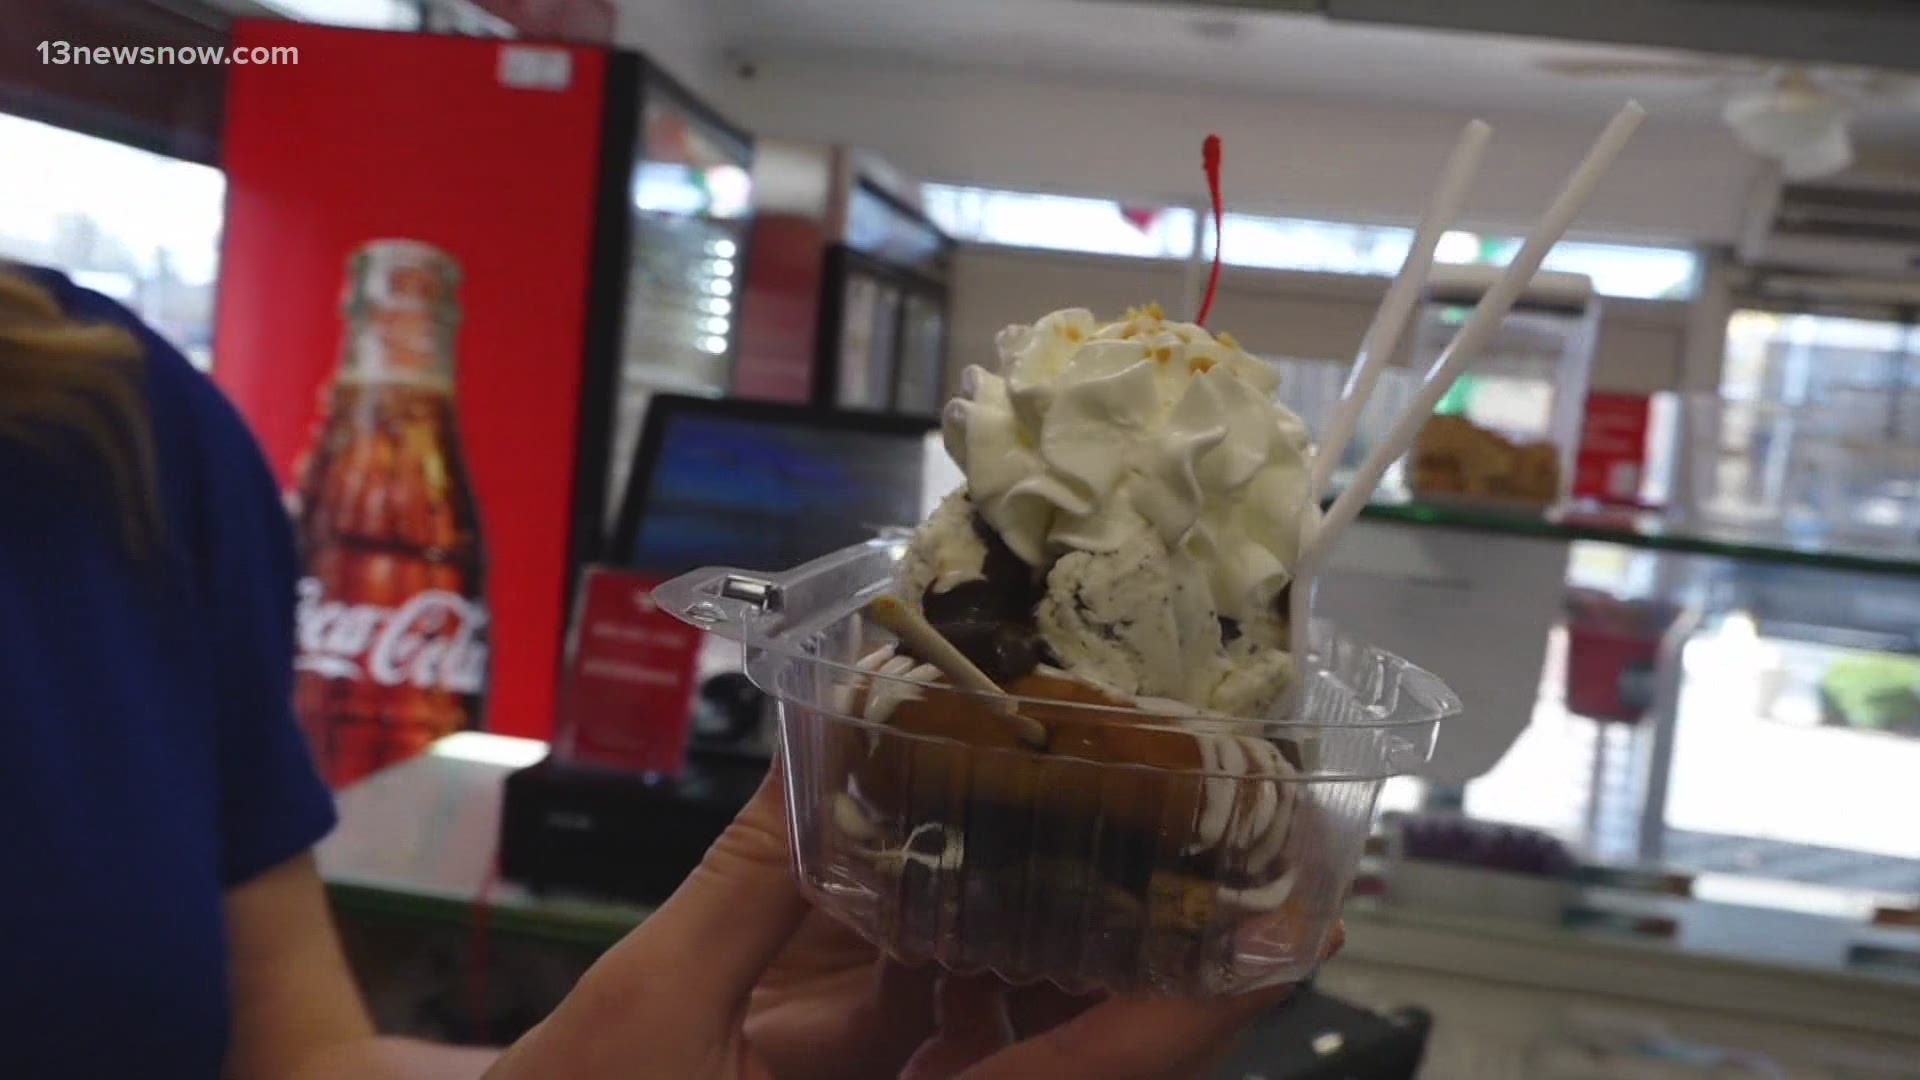 Donutz on a Stick serves sundaes, sandwiches, milkshakes, all with one common ingredient, doughnuts.